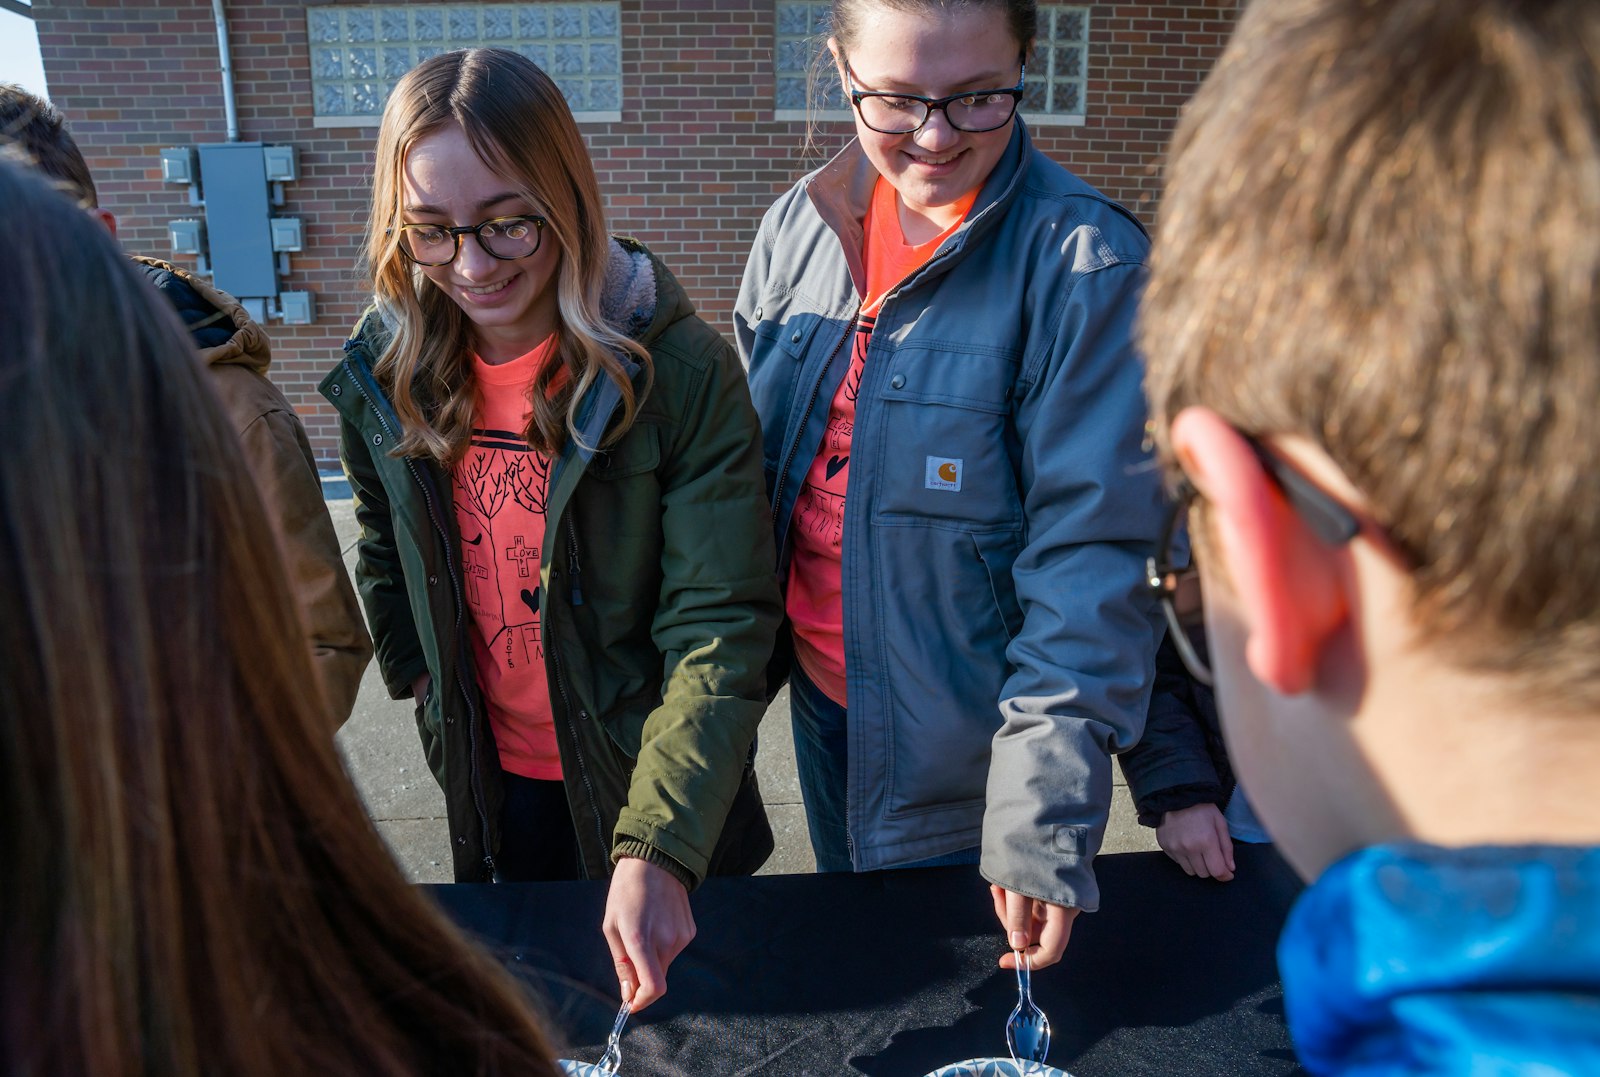 St. Charles Academy students play a game trying to transfer Skittles via a spoon during a live broadcast at the school on Jan. 31, the first day of Catholic Schools Week.